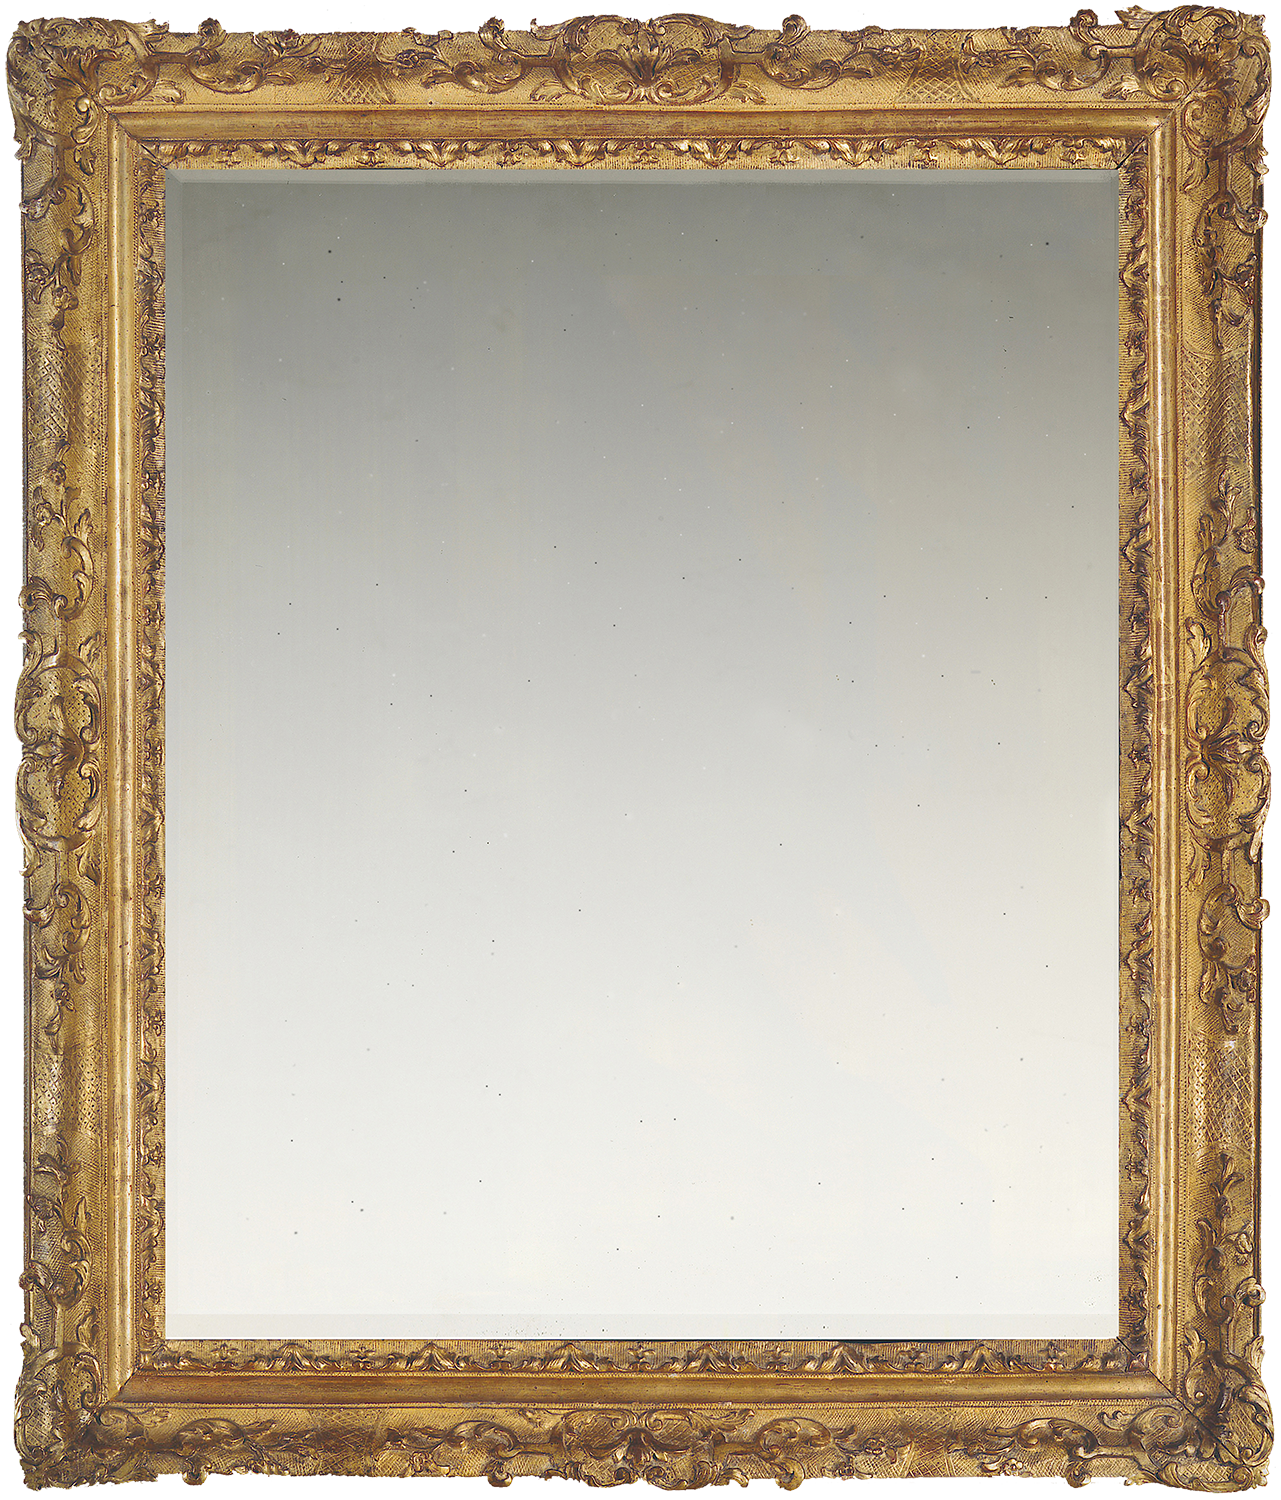 1st half 18th century French, Provincial late Baroque frame